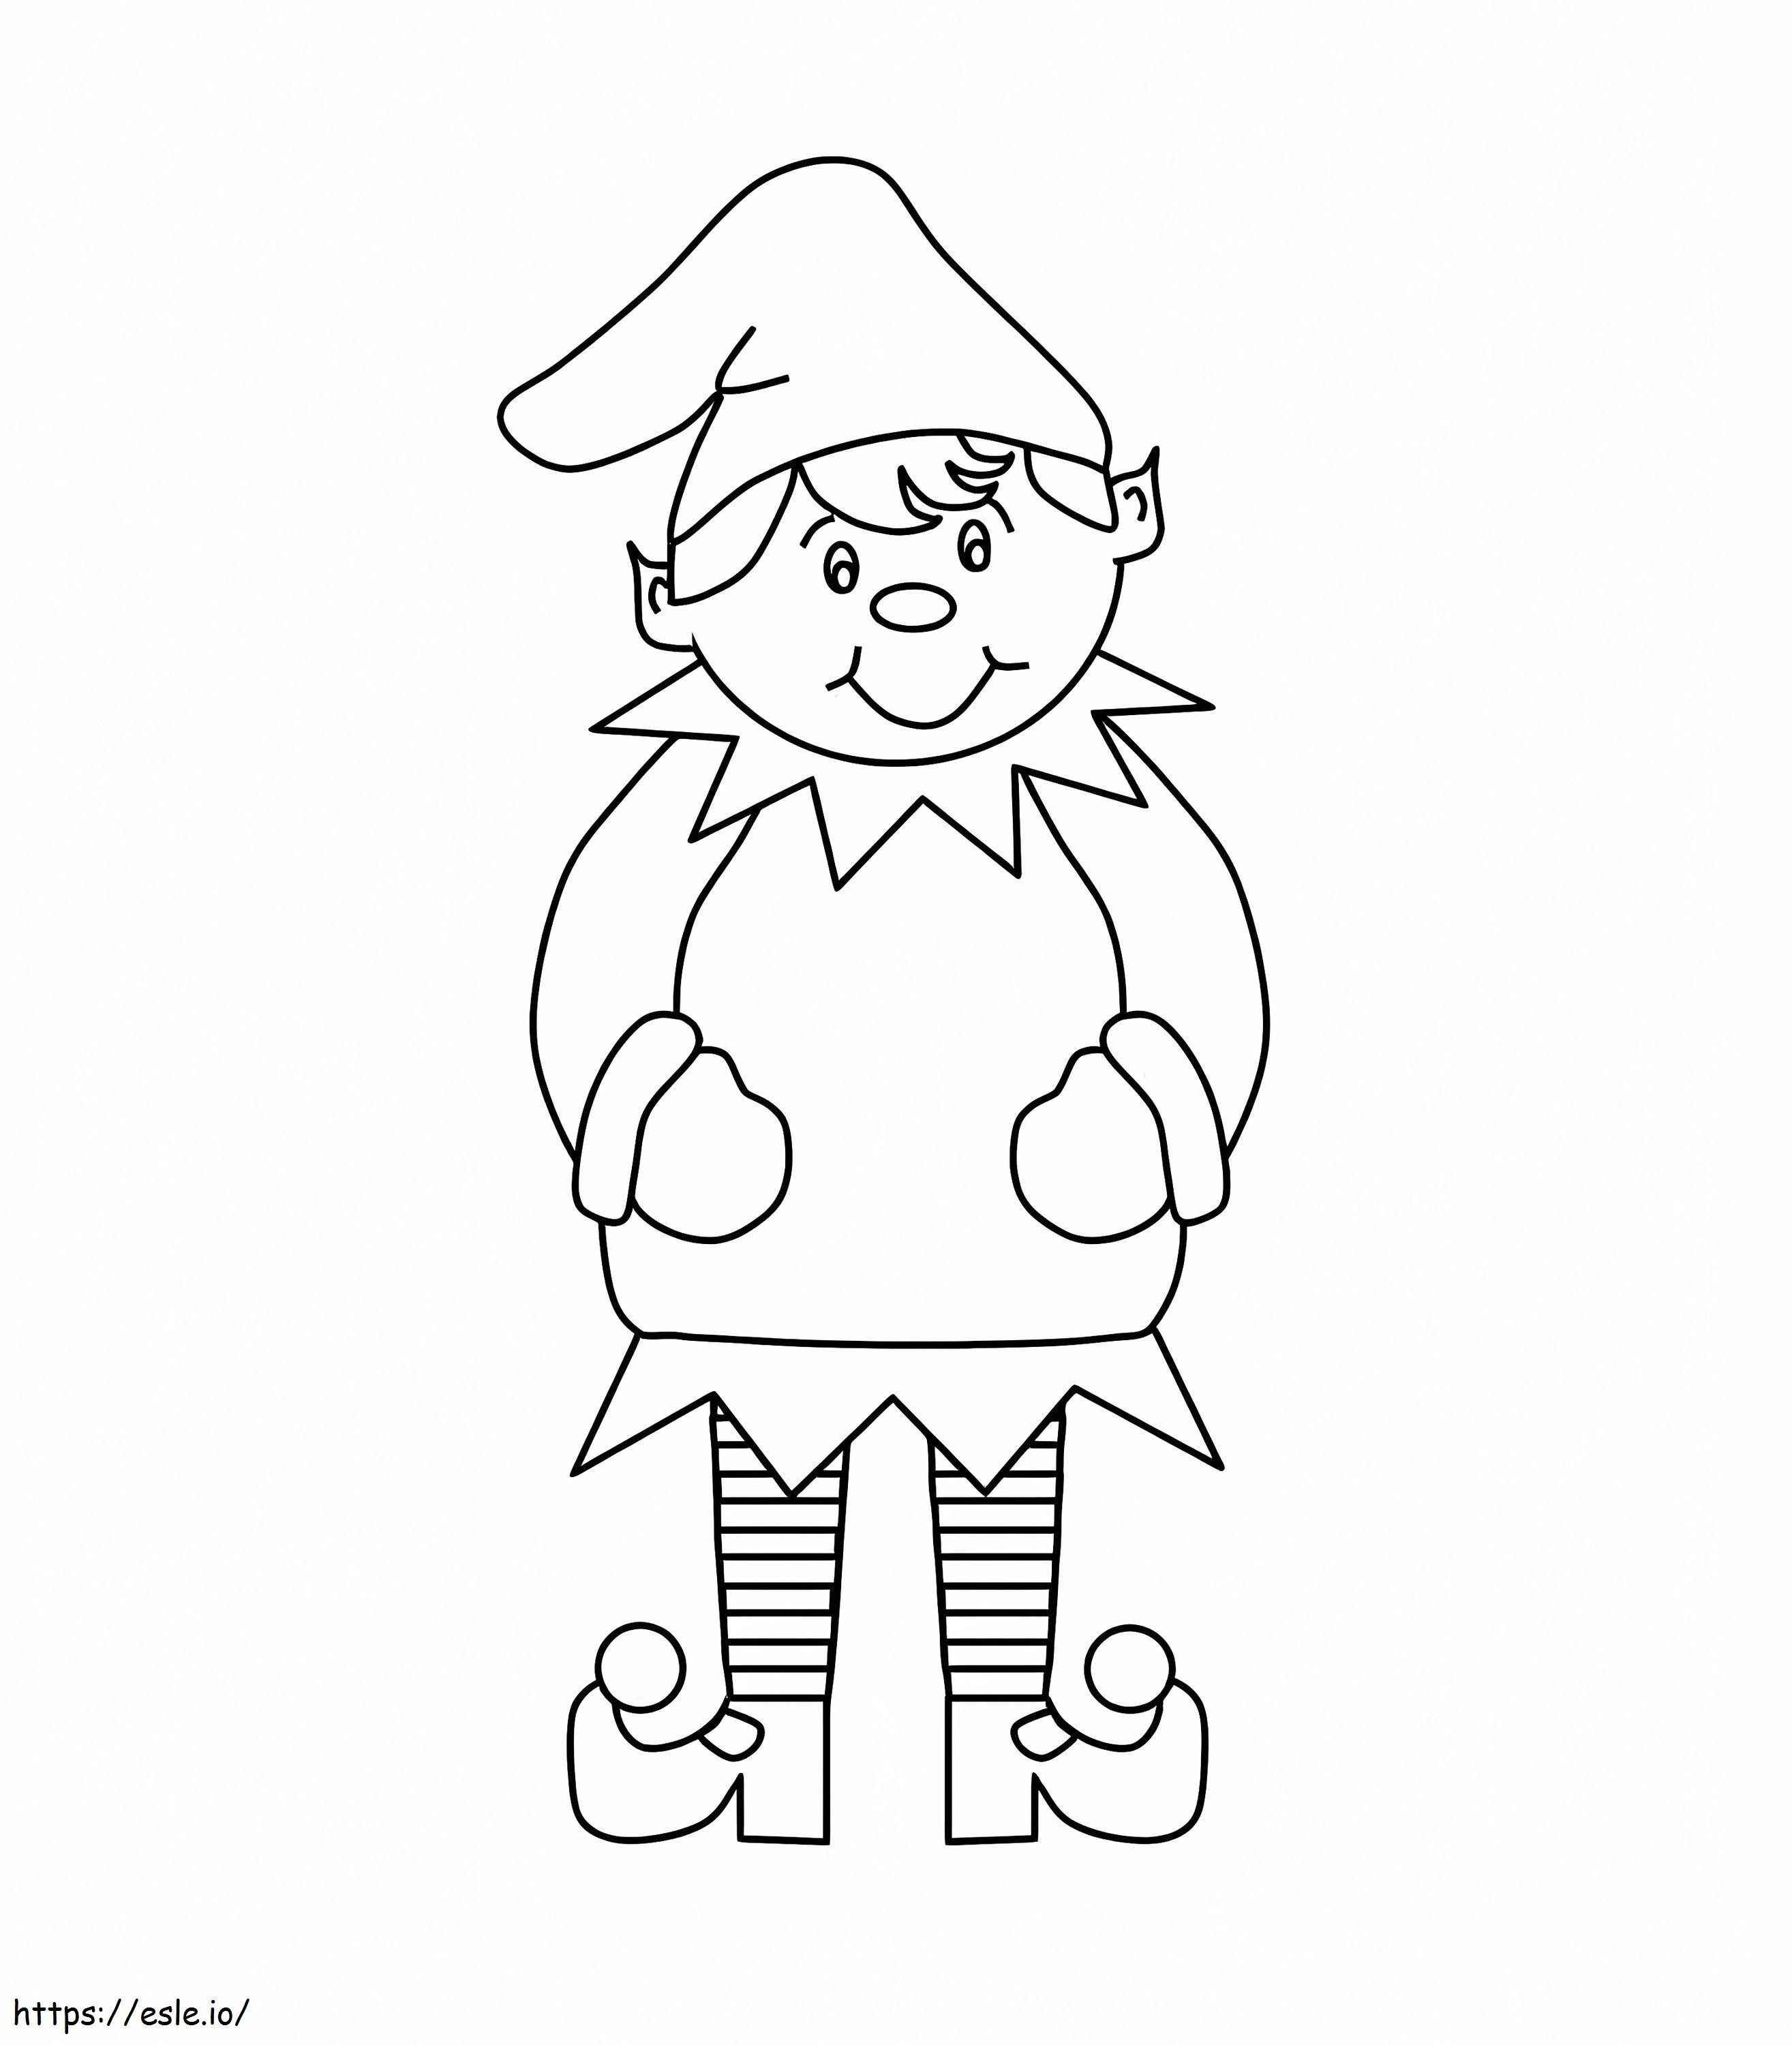 Elf Smiling coloring page